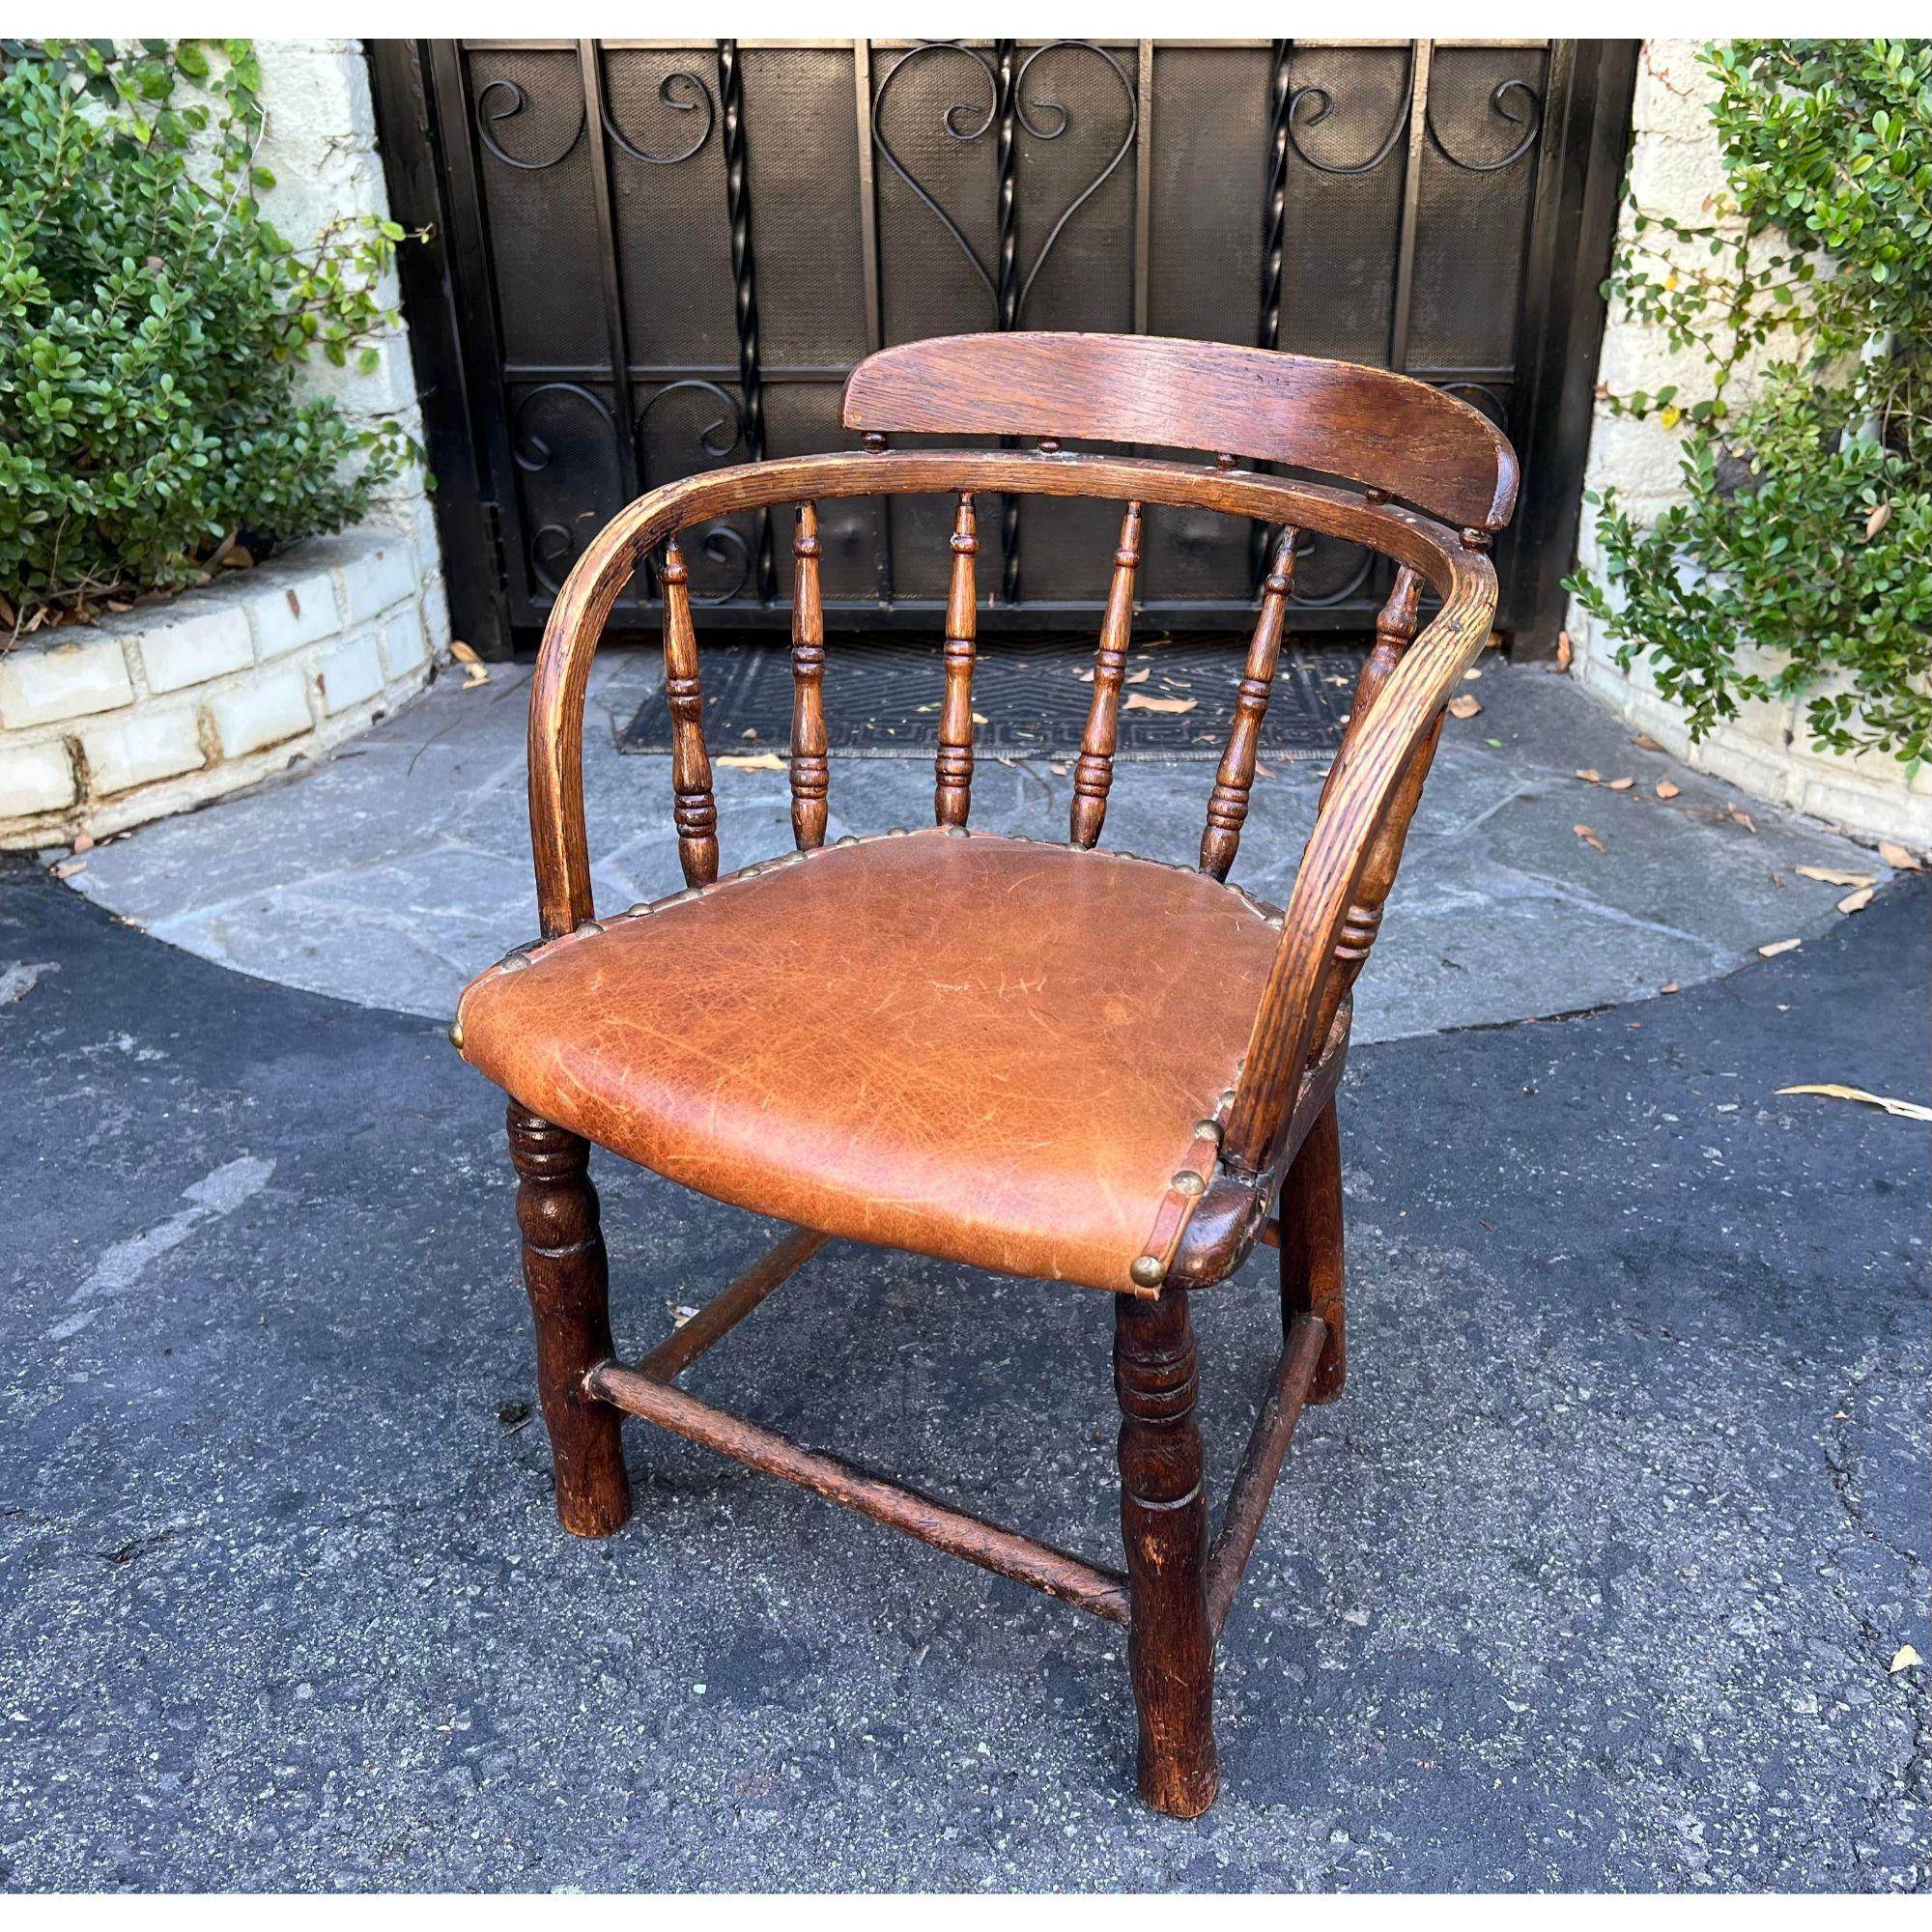 Antique Child’s Windsor barrel chair W leather seat. It is a very unusual example with a beautiful patina and genuine leather seat.

Additional information: 
Materials: Leather
Color: Brown
Period: 19th century
Styles: English